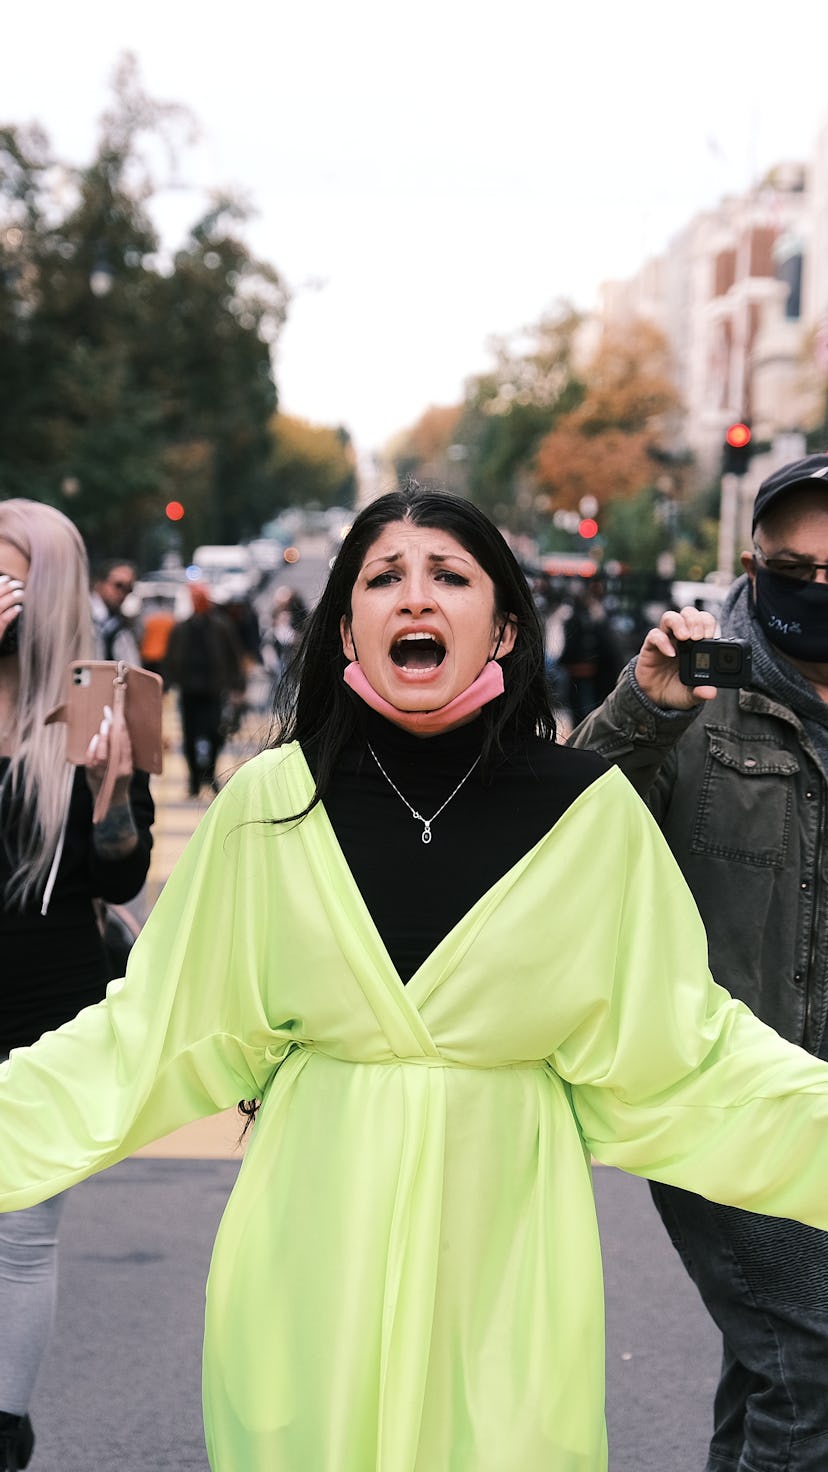 A woman in a green coat on the street during the Election Day 2020 